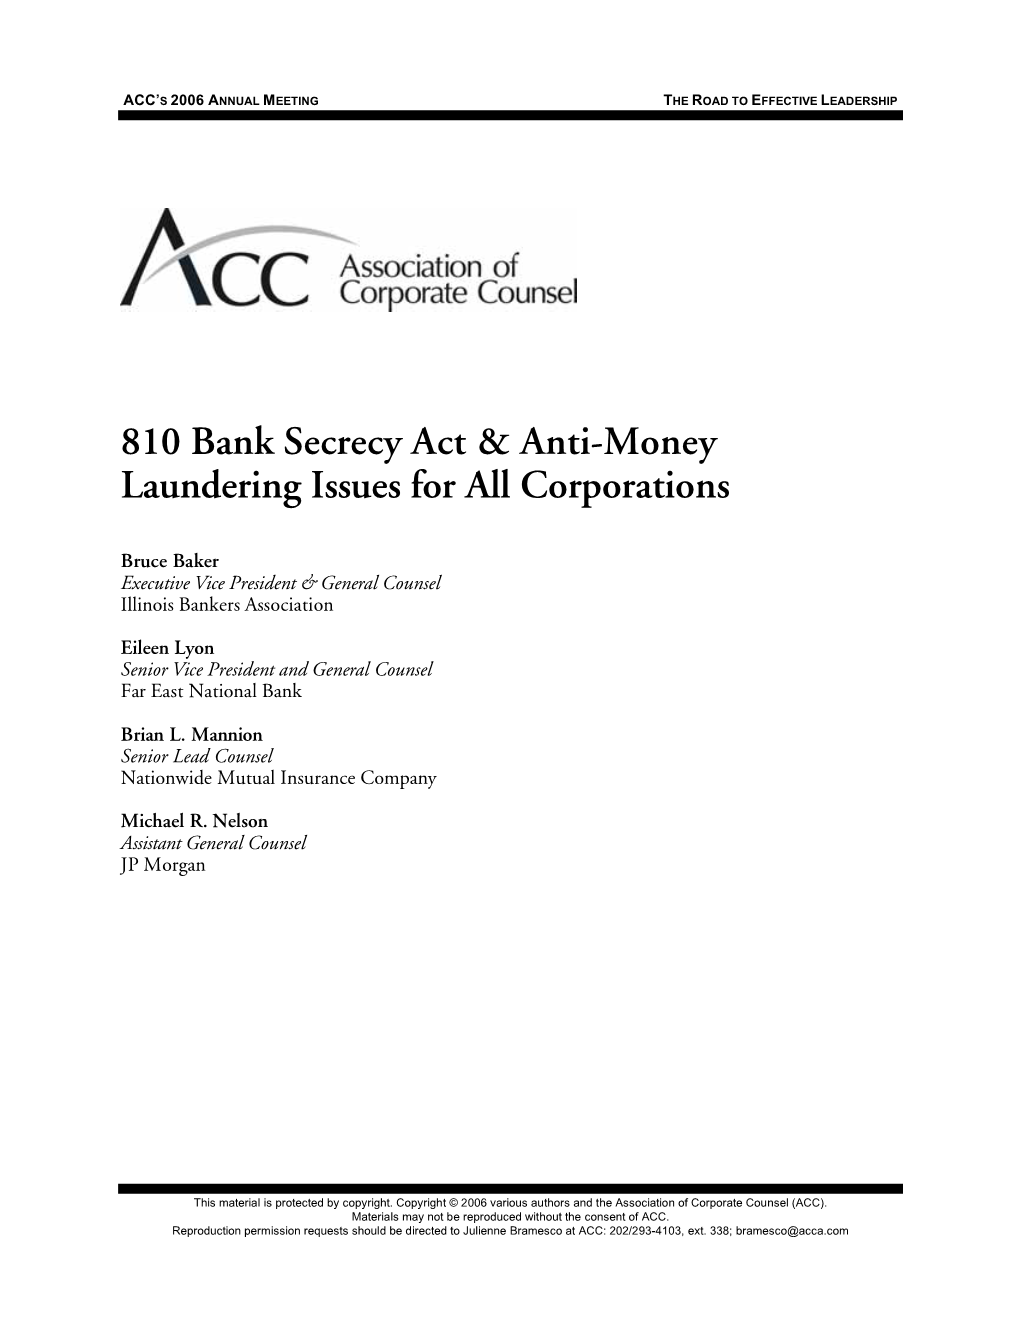 810 Bank Secrecy Act & Anti-Money Laundering Issues for All